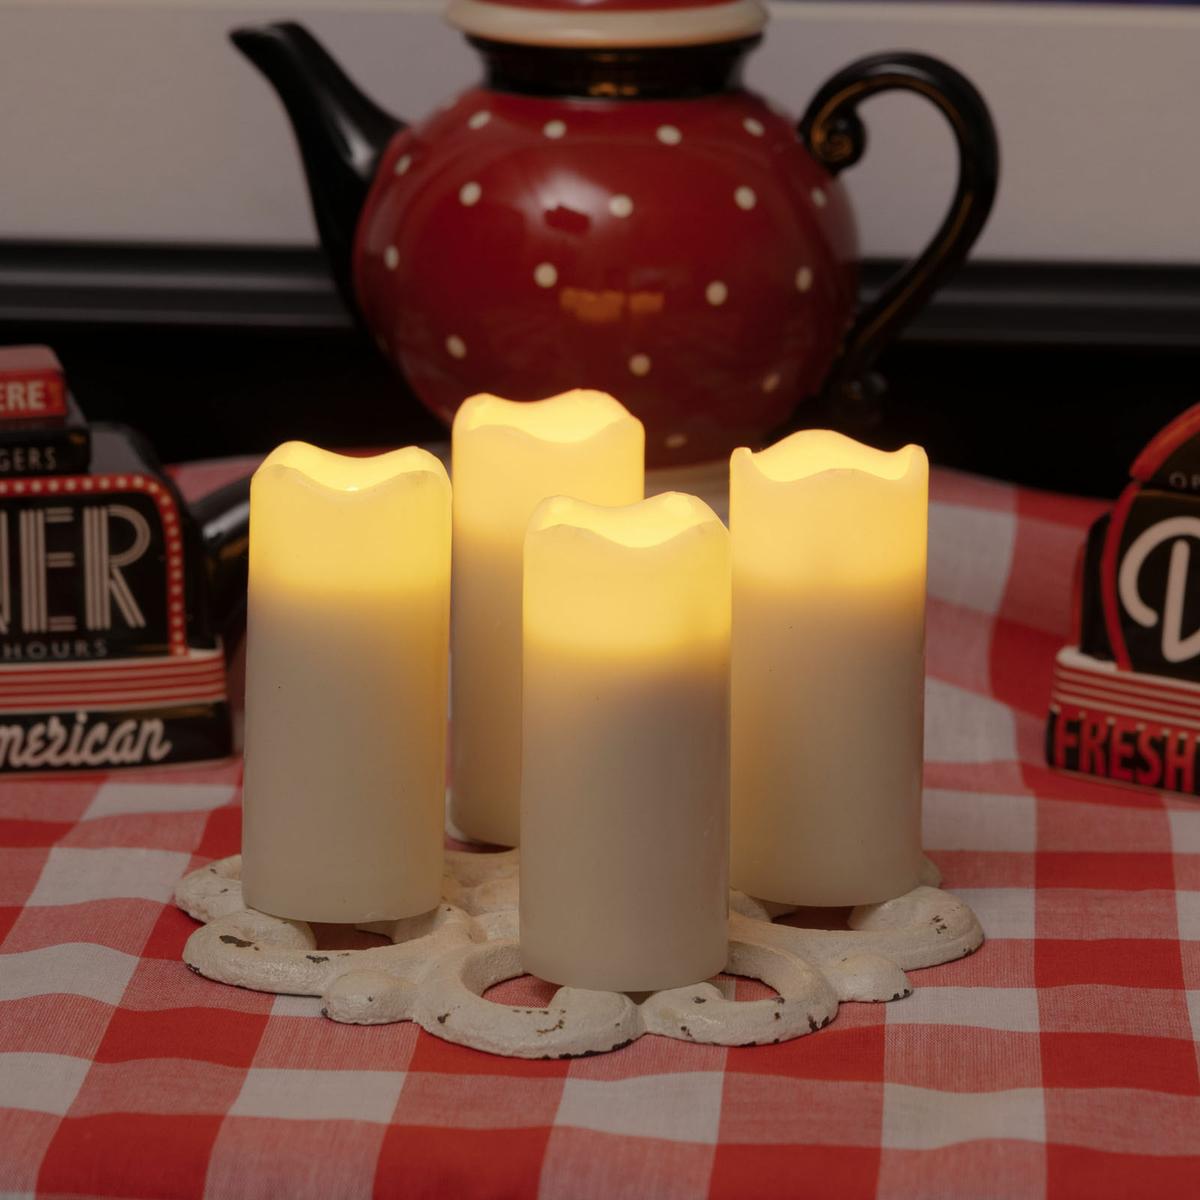 Flameless LED Votive Candles with Timer - Set of 4